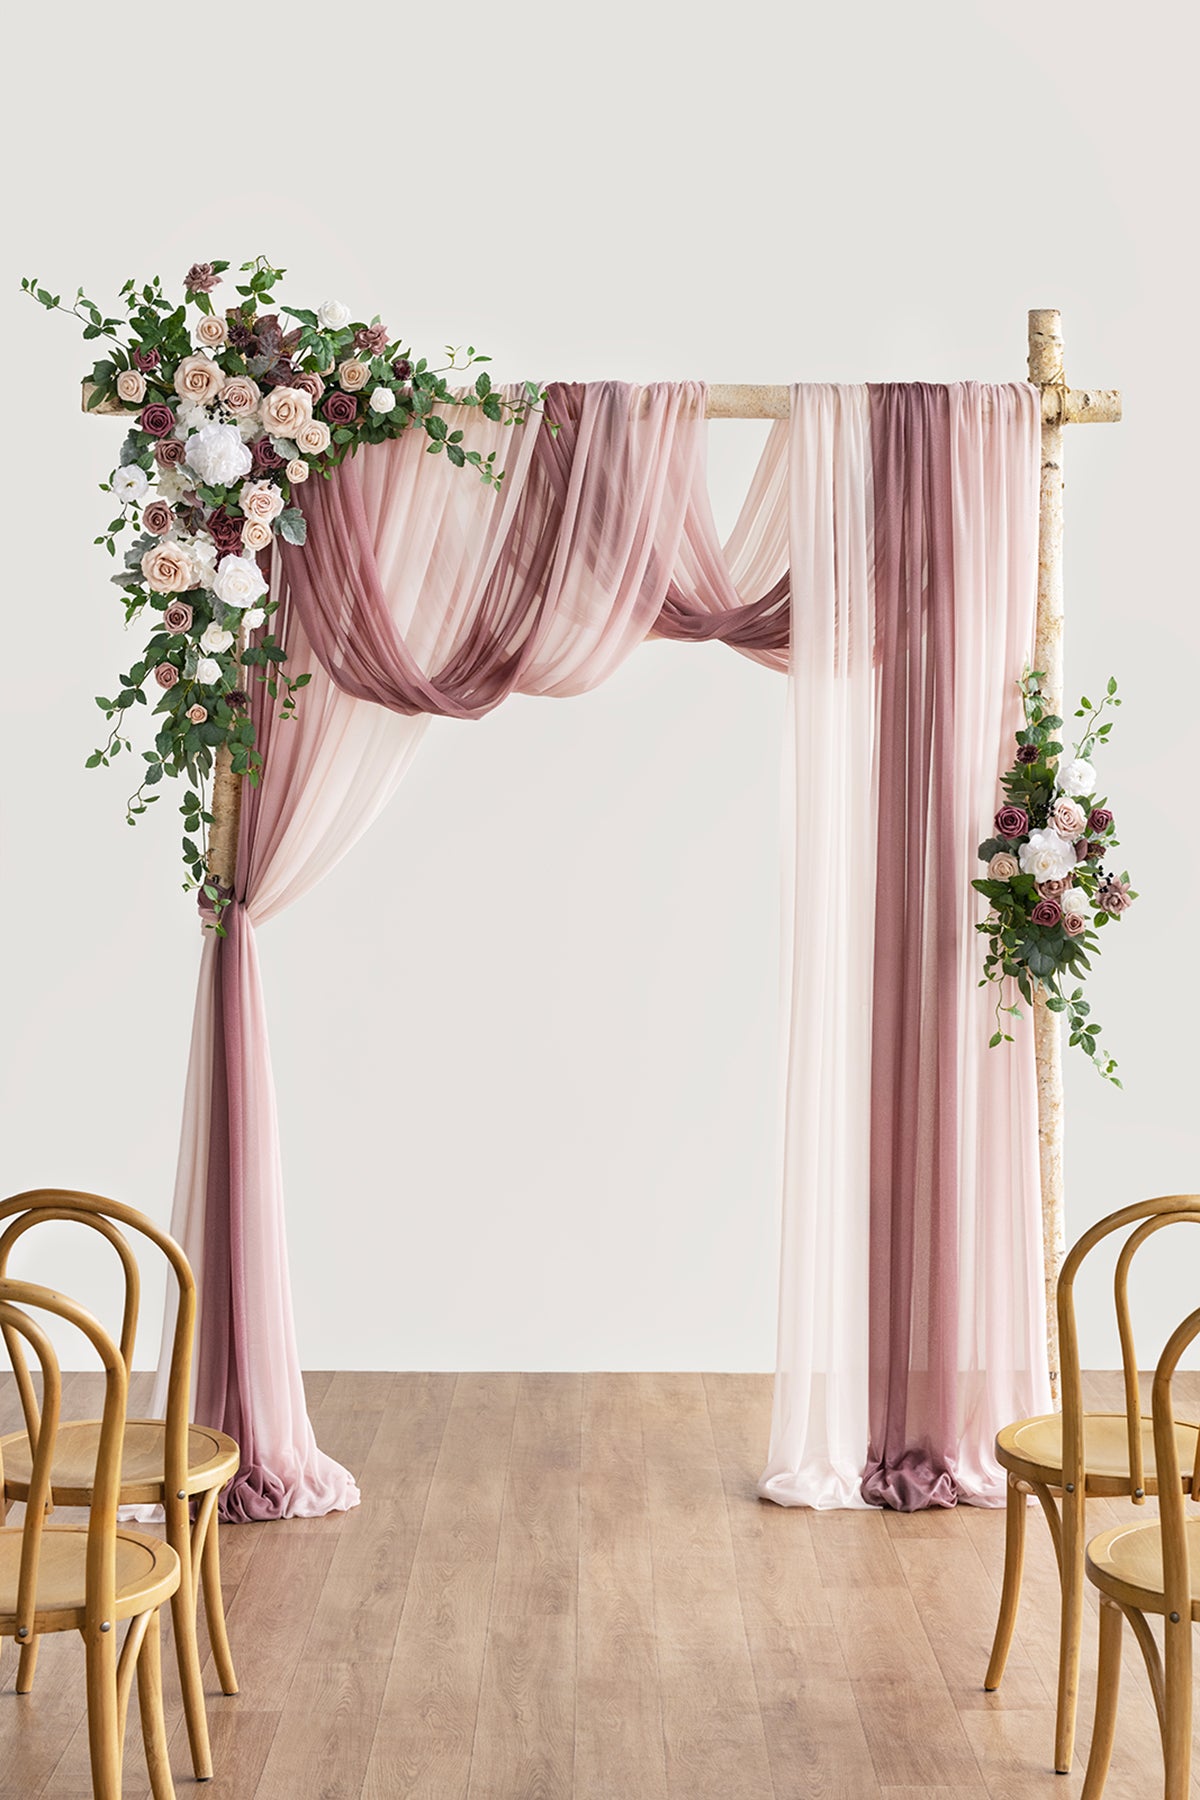 Flower Arch Decor with Drapes in Dusty Rose & Mauve